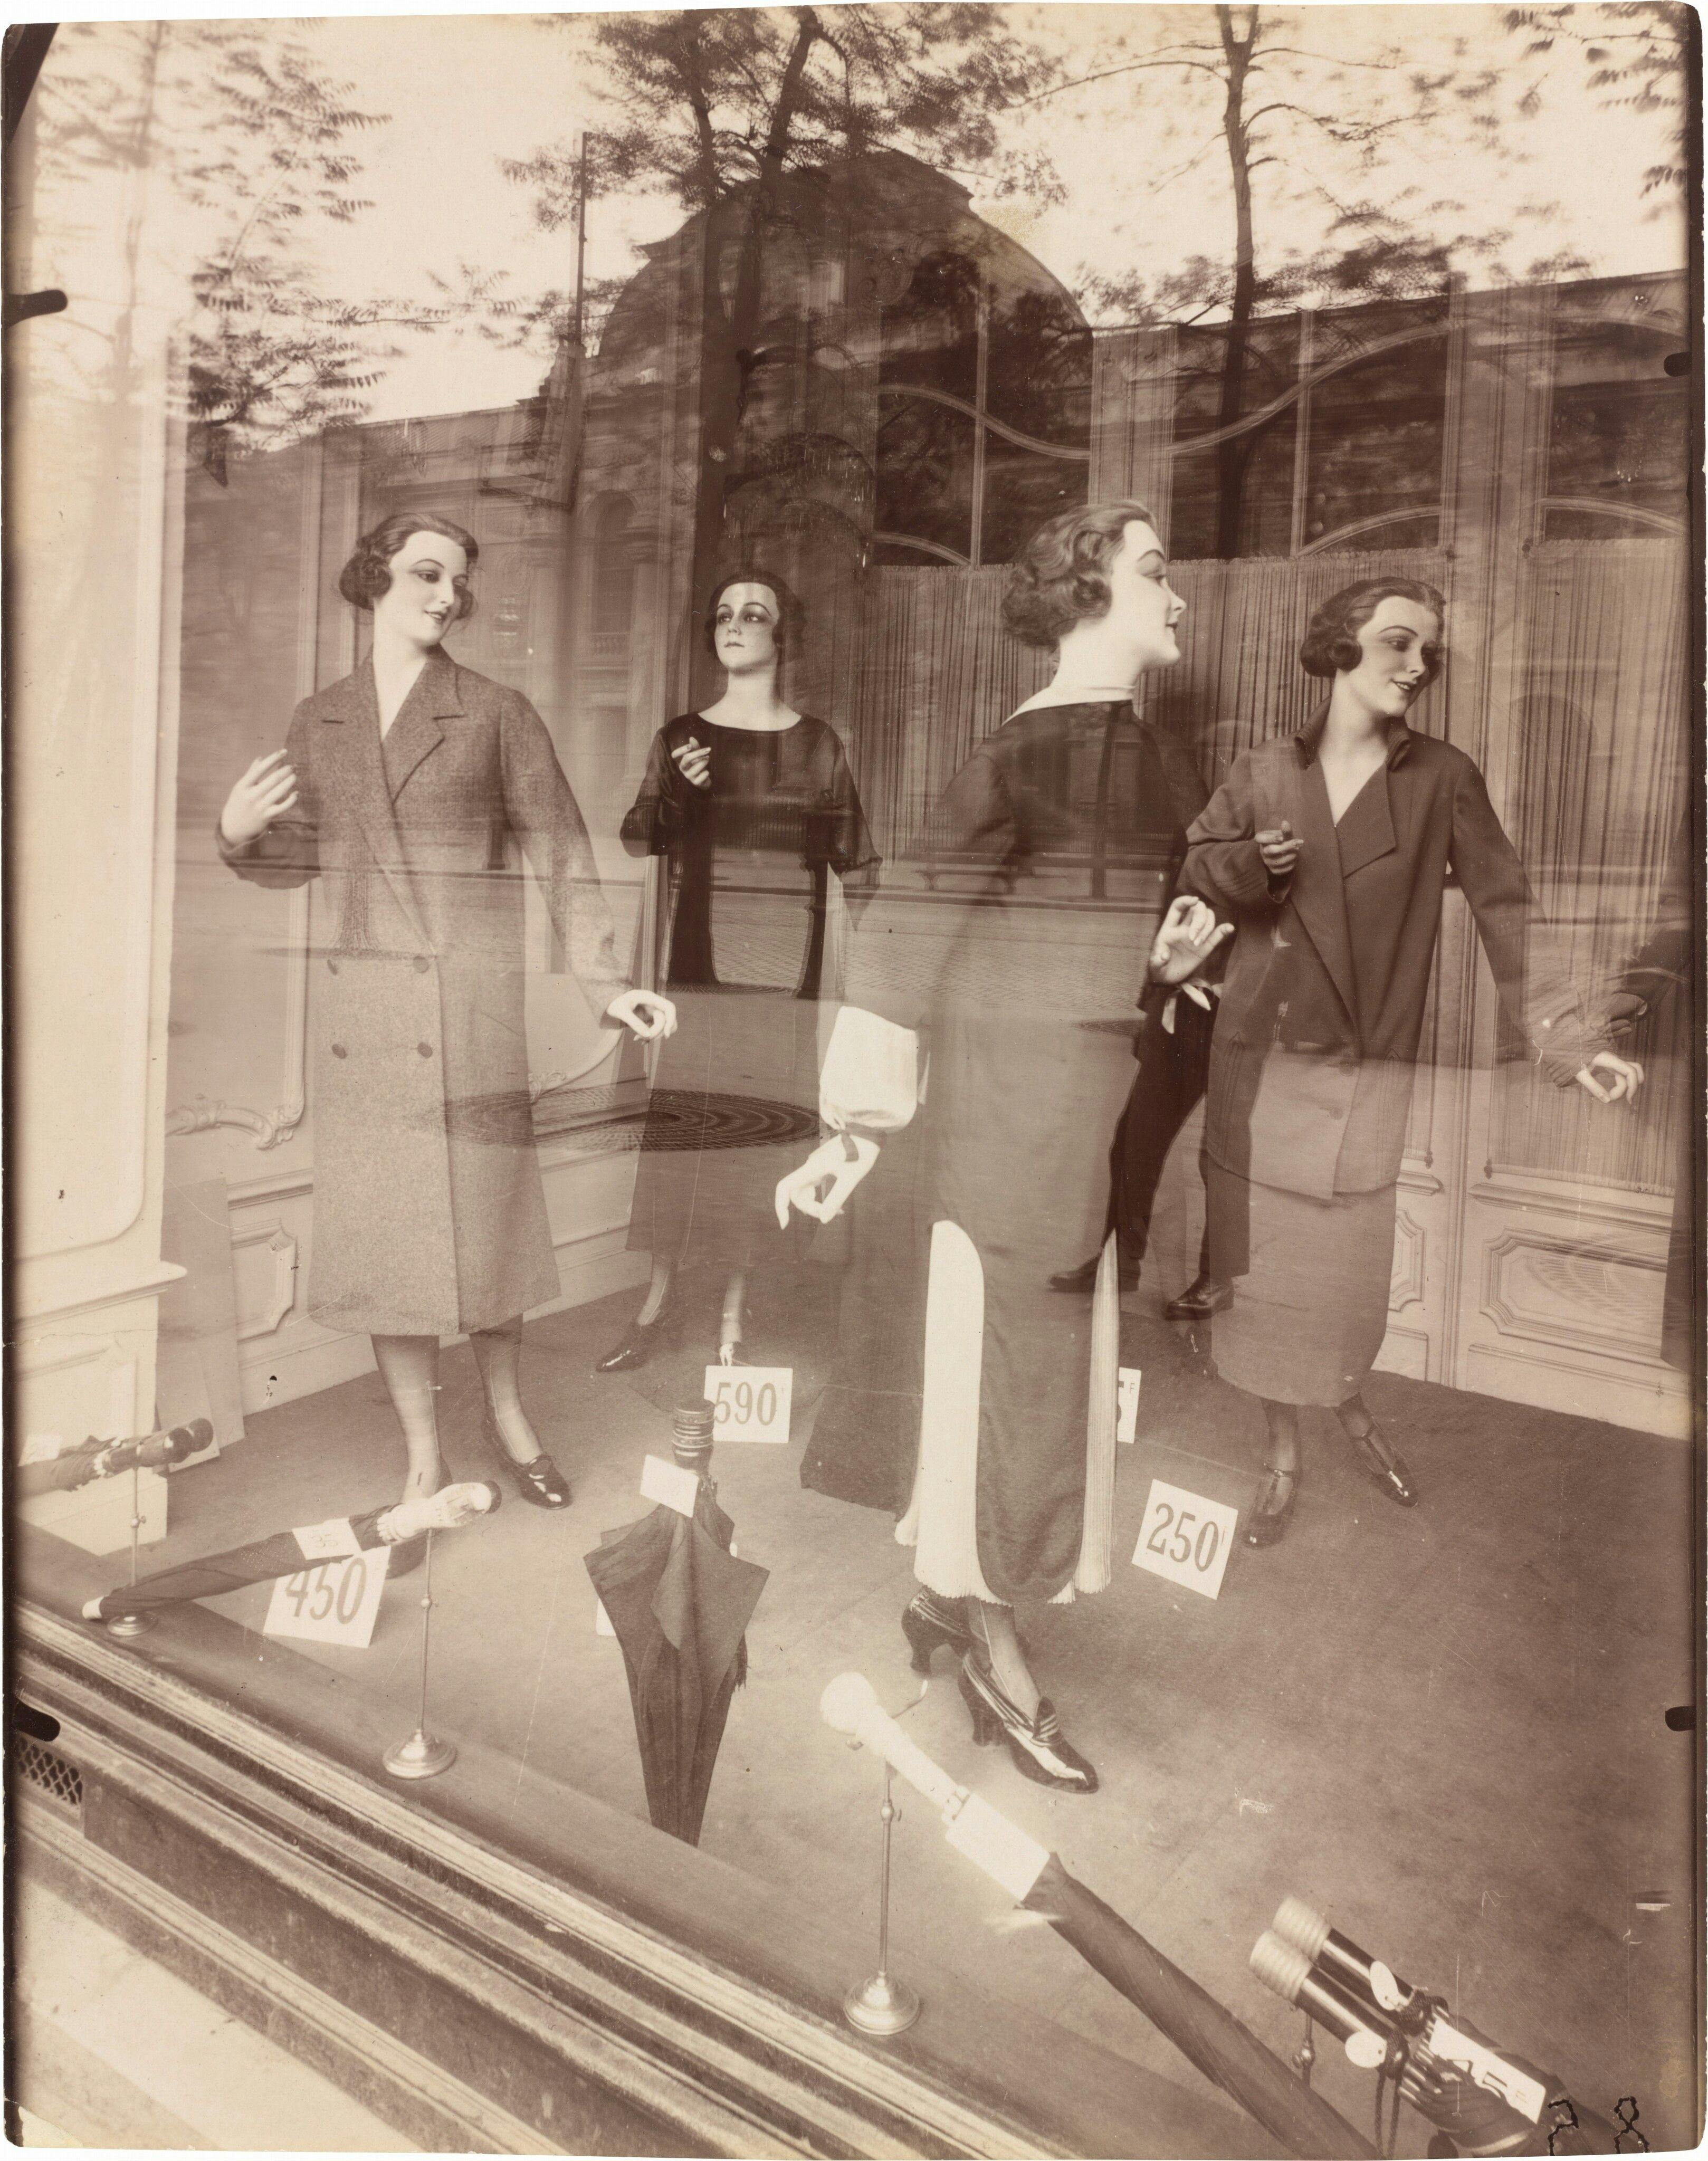 sepia photograph of a women's fashion storefront, female mannequins in dresses with price tags, reflective glass with tree silhouette, by Eugène Atget